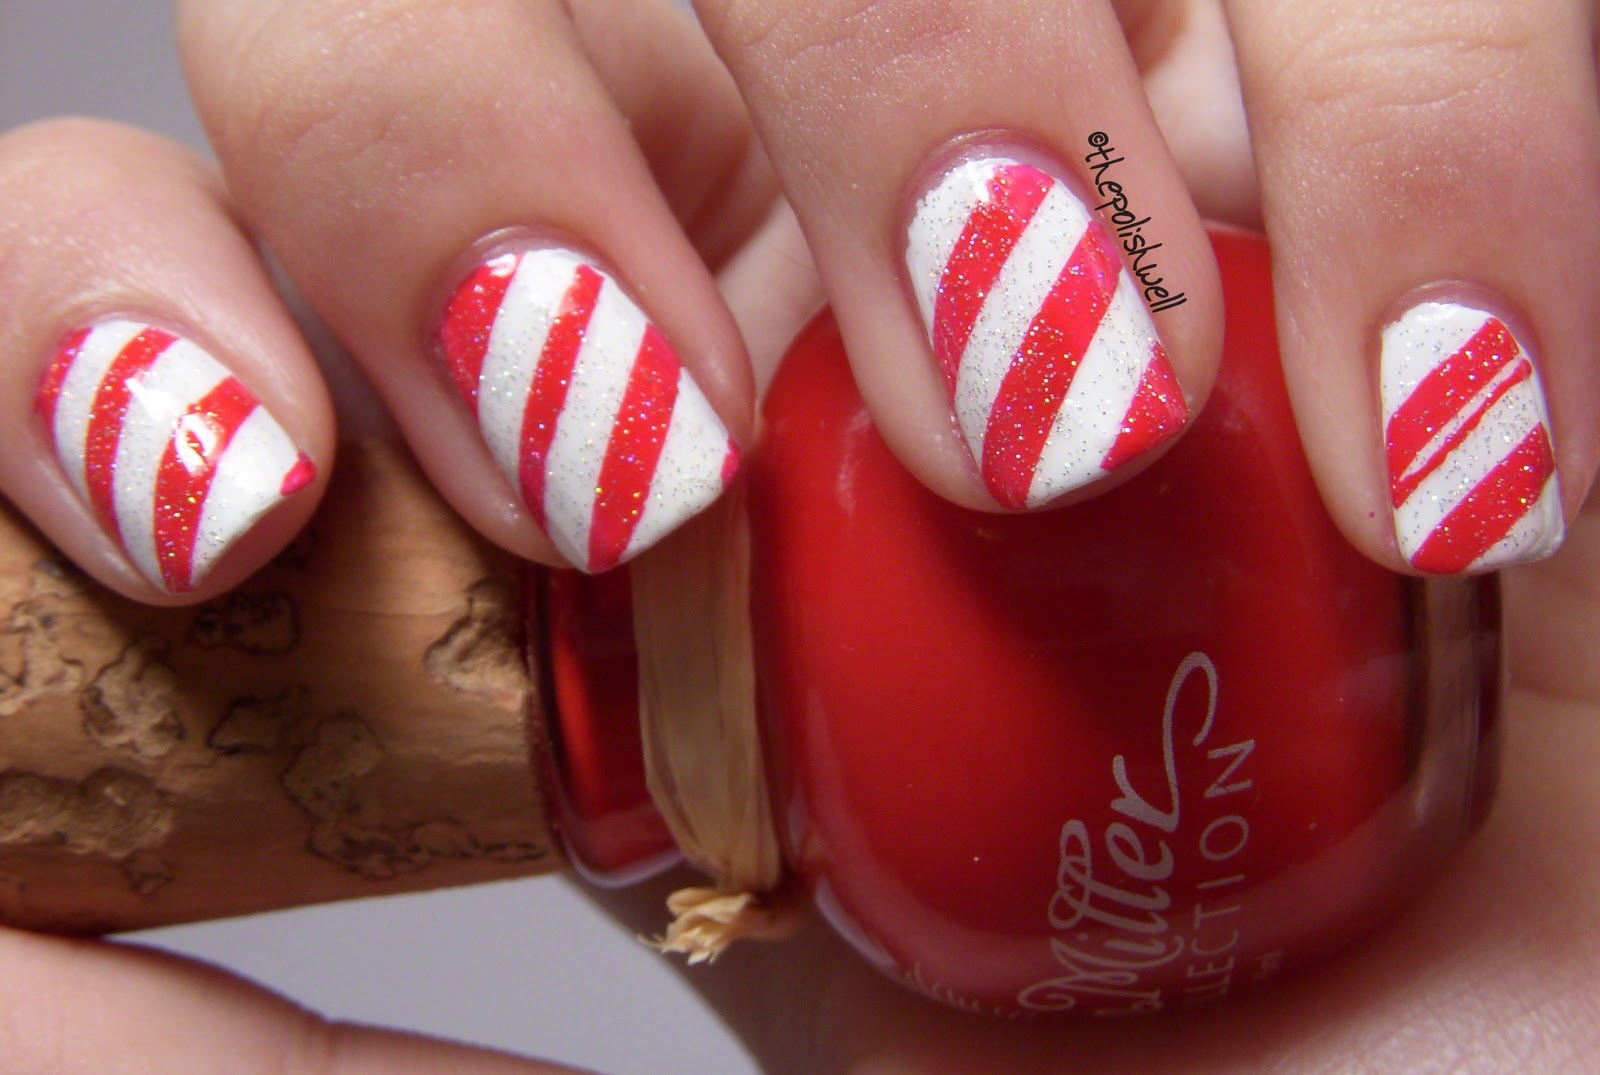 8. Candy Cane Nail Art Designs for Short Nails on Pinterest - wide 8